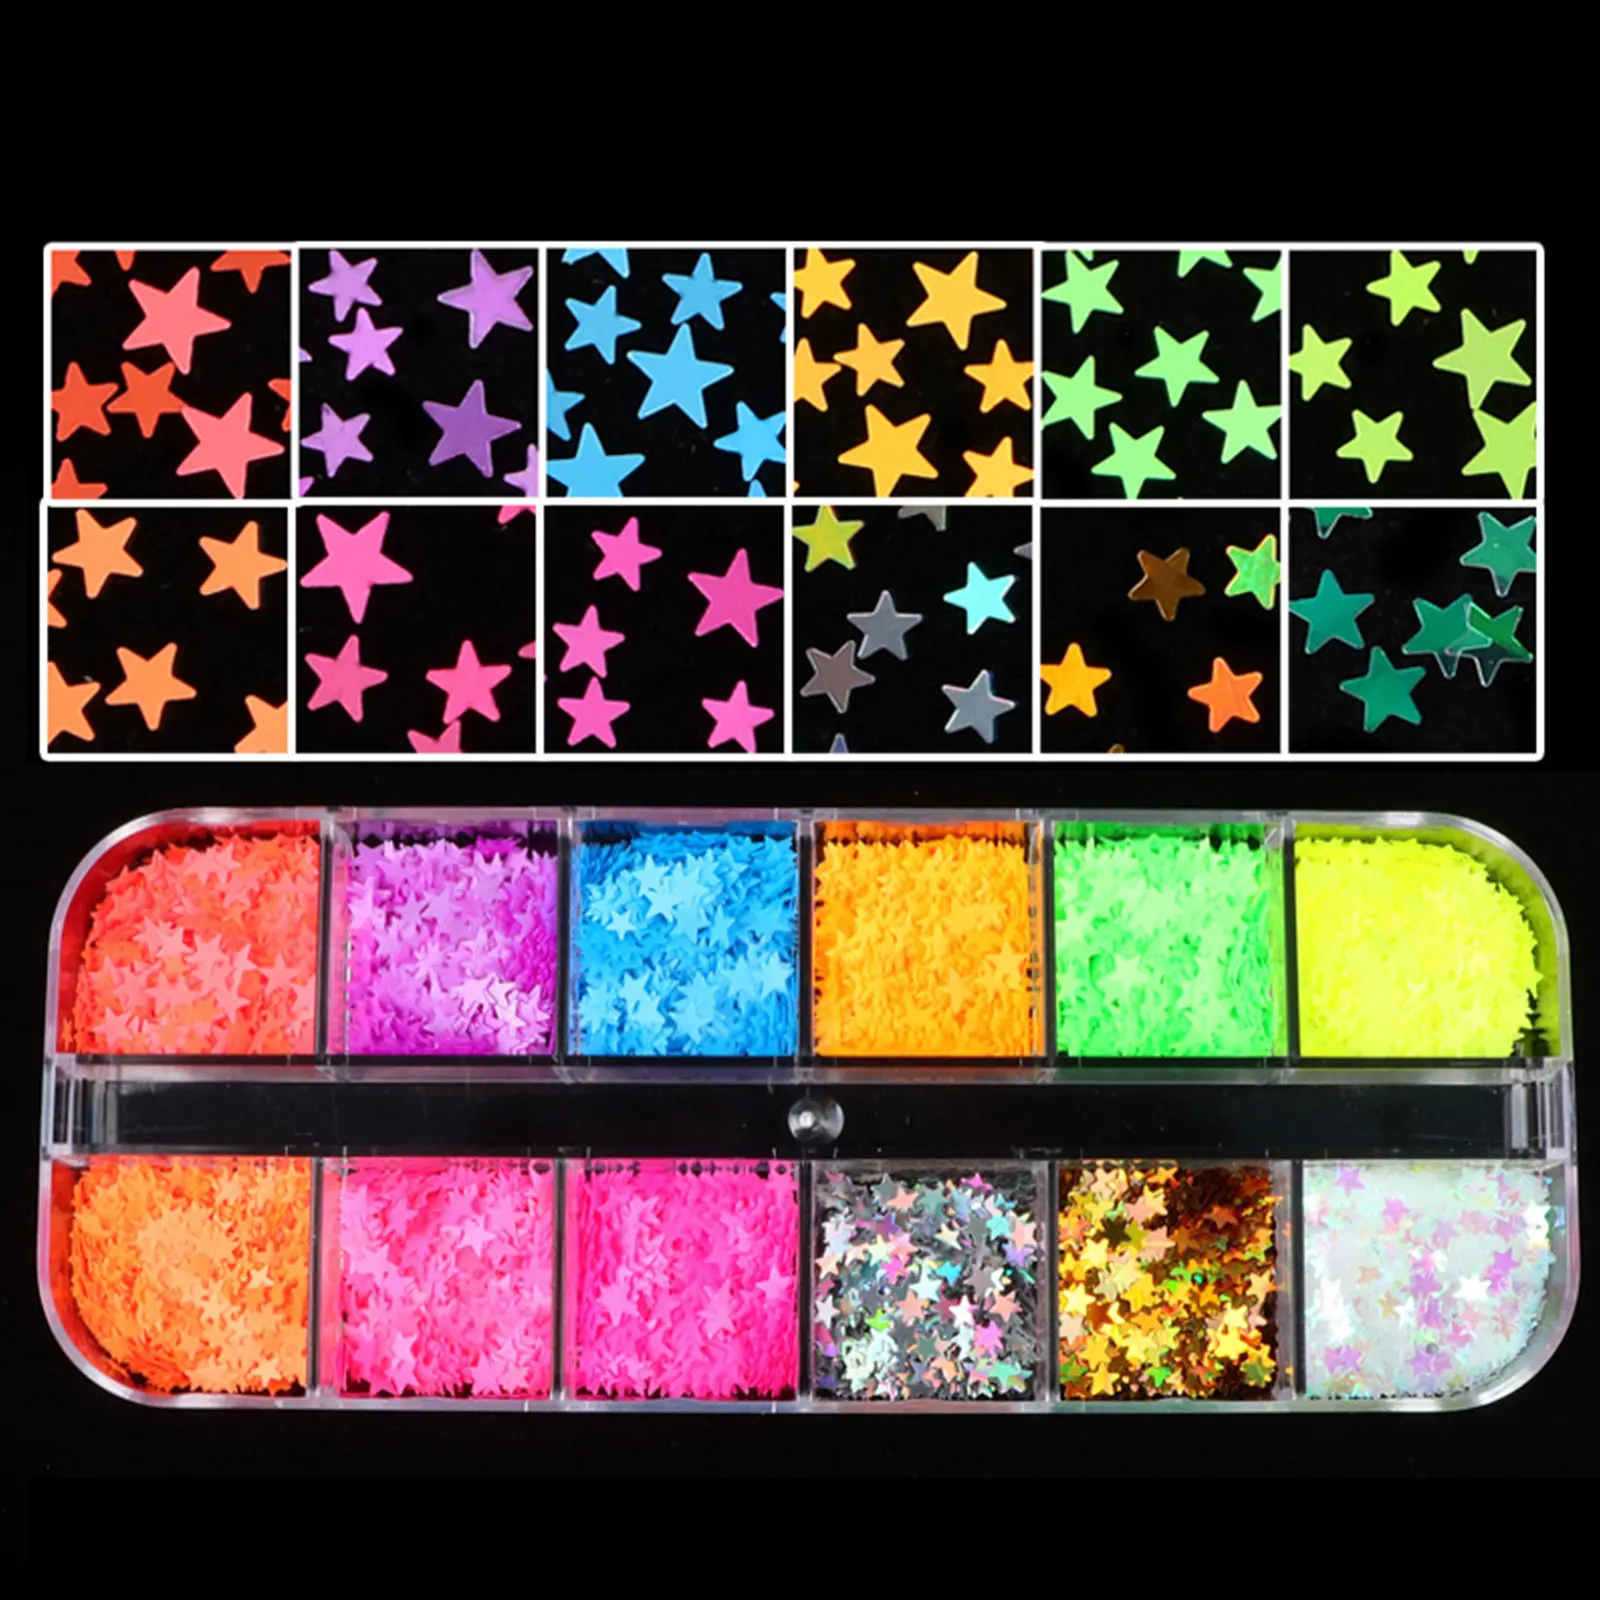 

Fluorescence Butterfly Heart Fruits Various Shapes Nail Art Glitter Flakes 3D Colourful Sequins Polish Manicure Nail Decoration